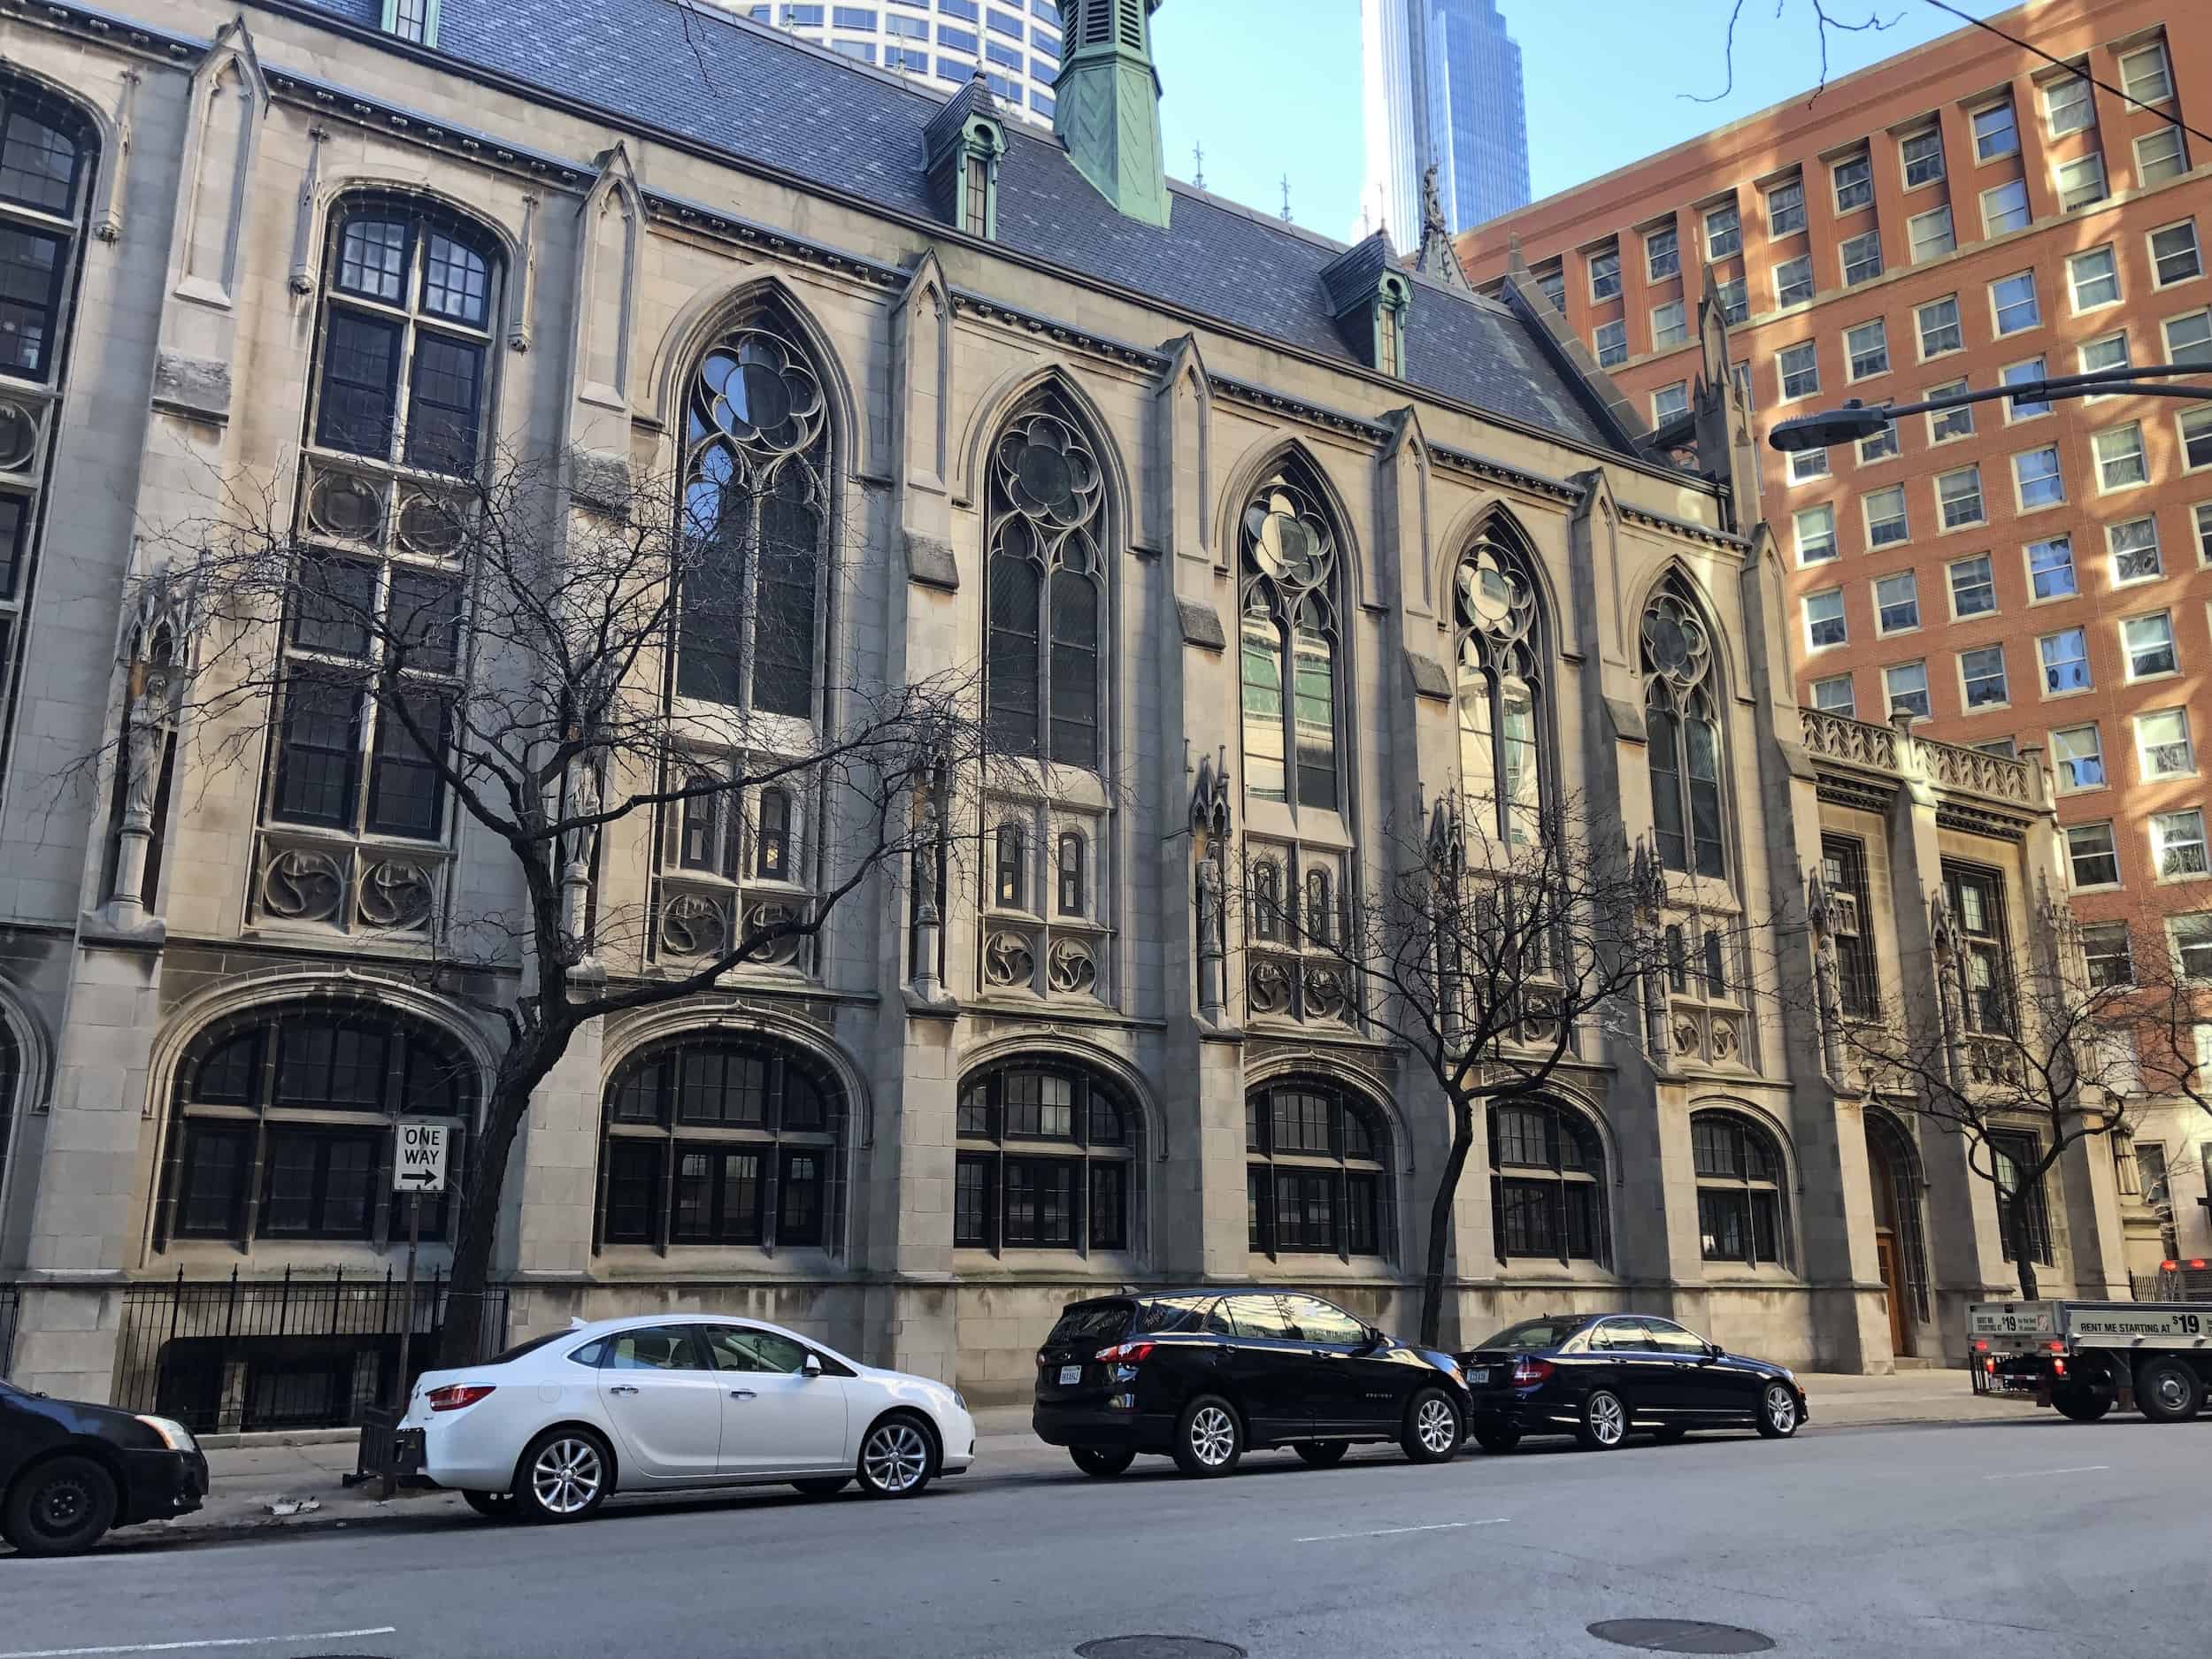 Archbishop Quigley Center at Rush and Division in Chicago, Illinois